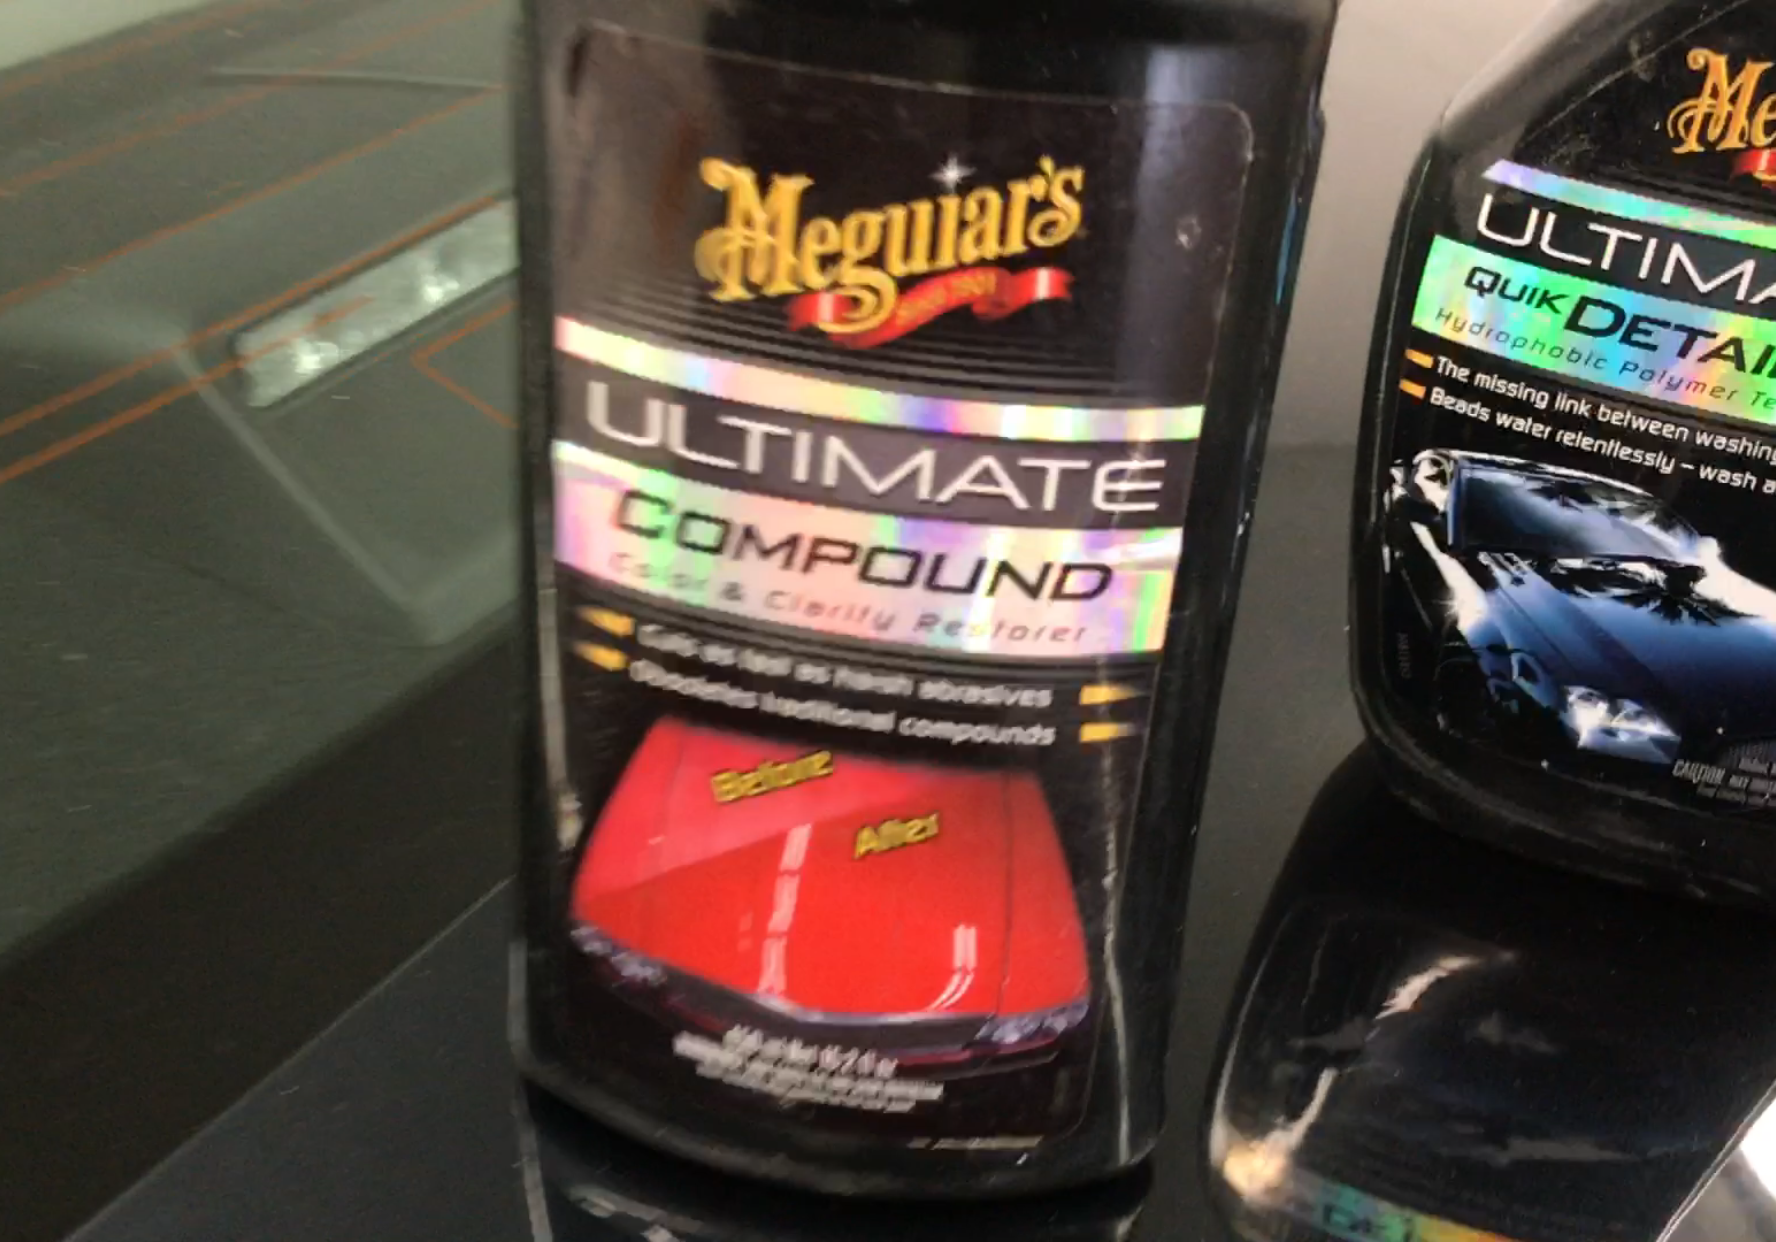 Meguiars Ultimate Compound, used in video of 2011 Toyota Camry Dent Removal, by Michael Bocek out of Springfield, IL. http://217dent.com